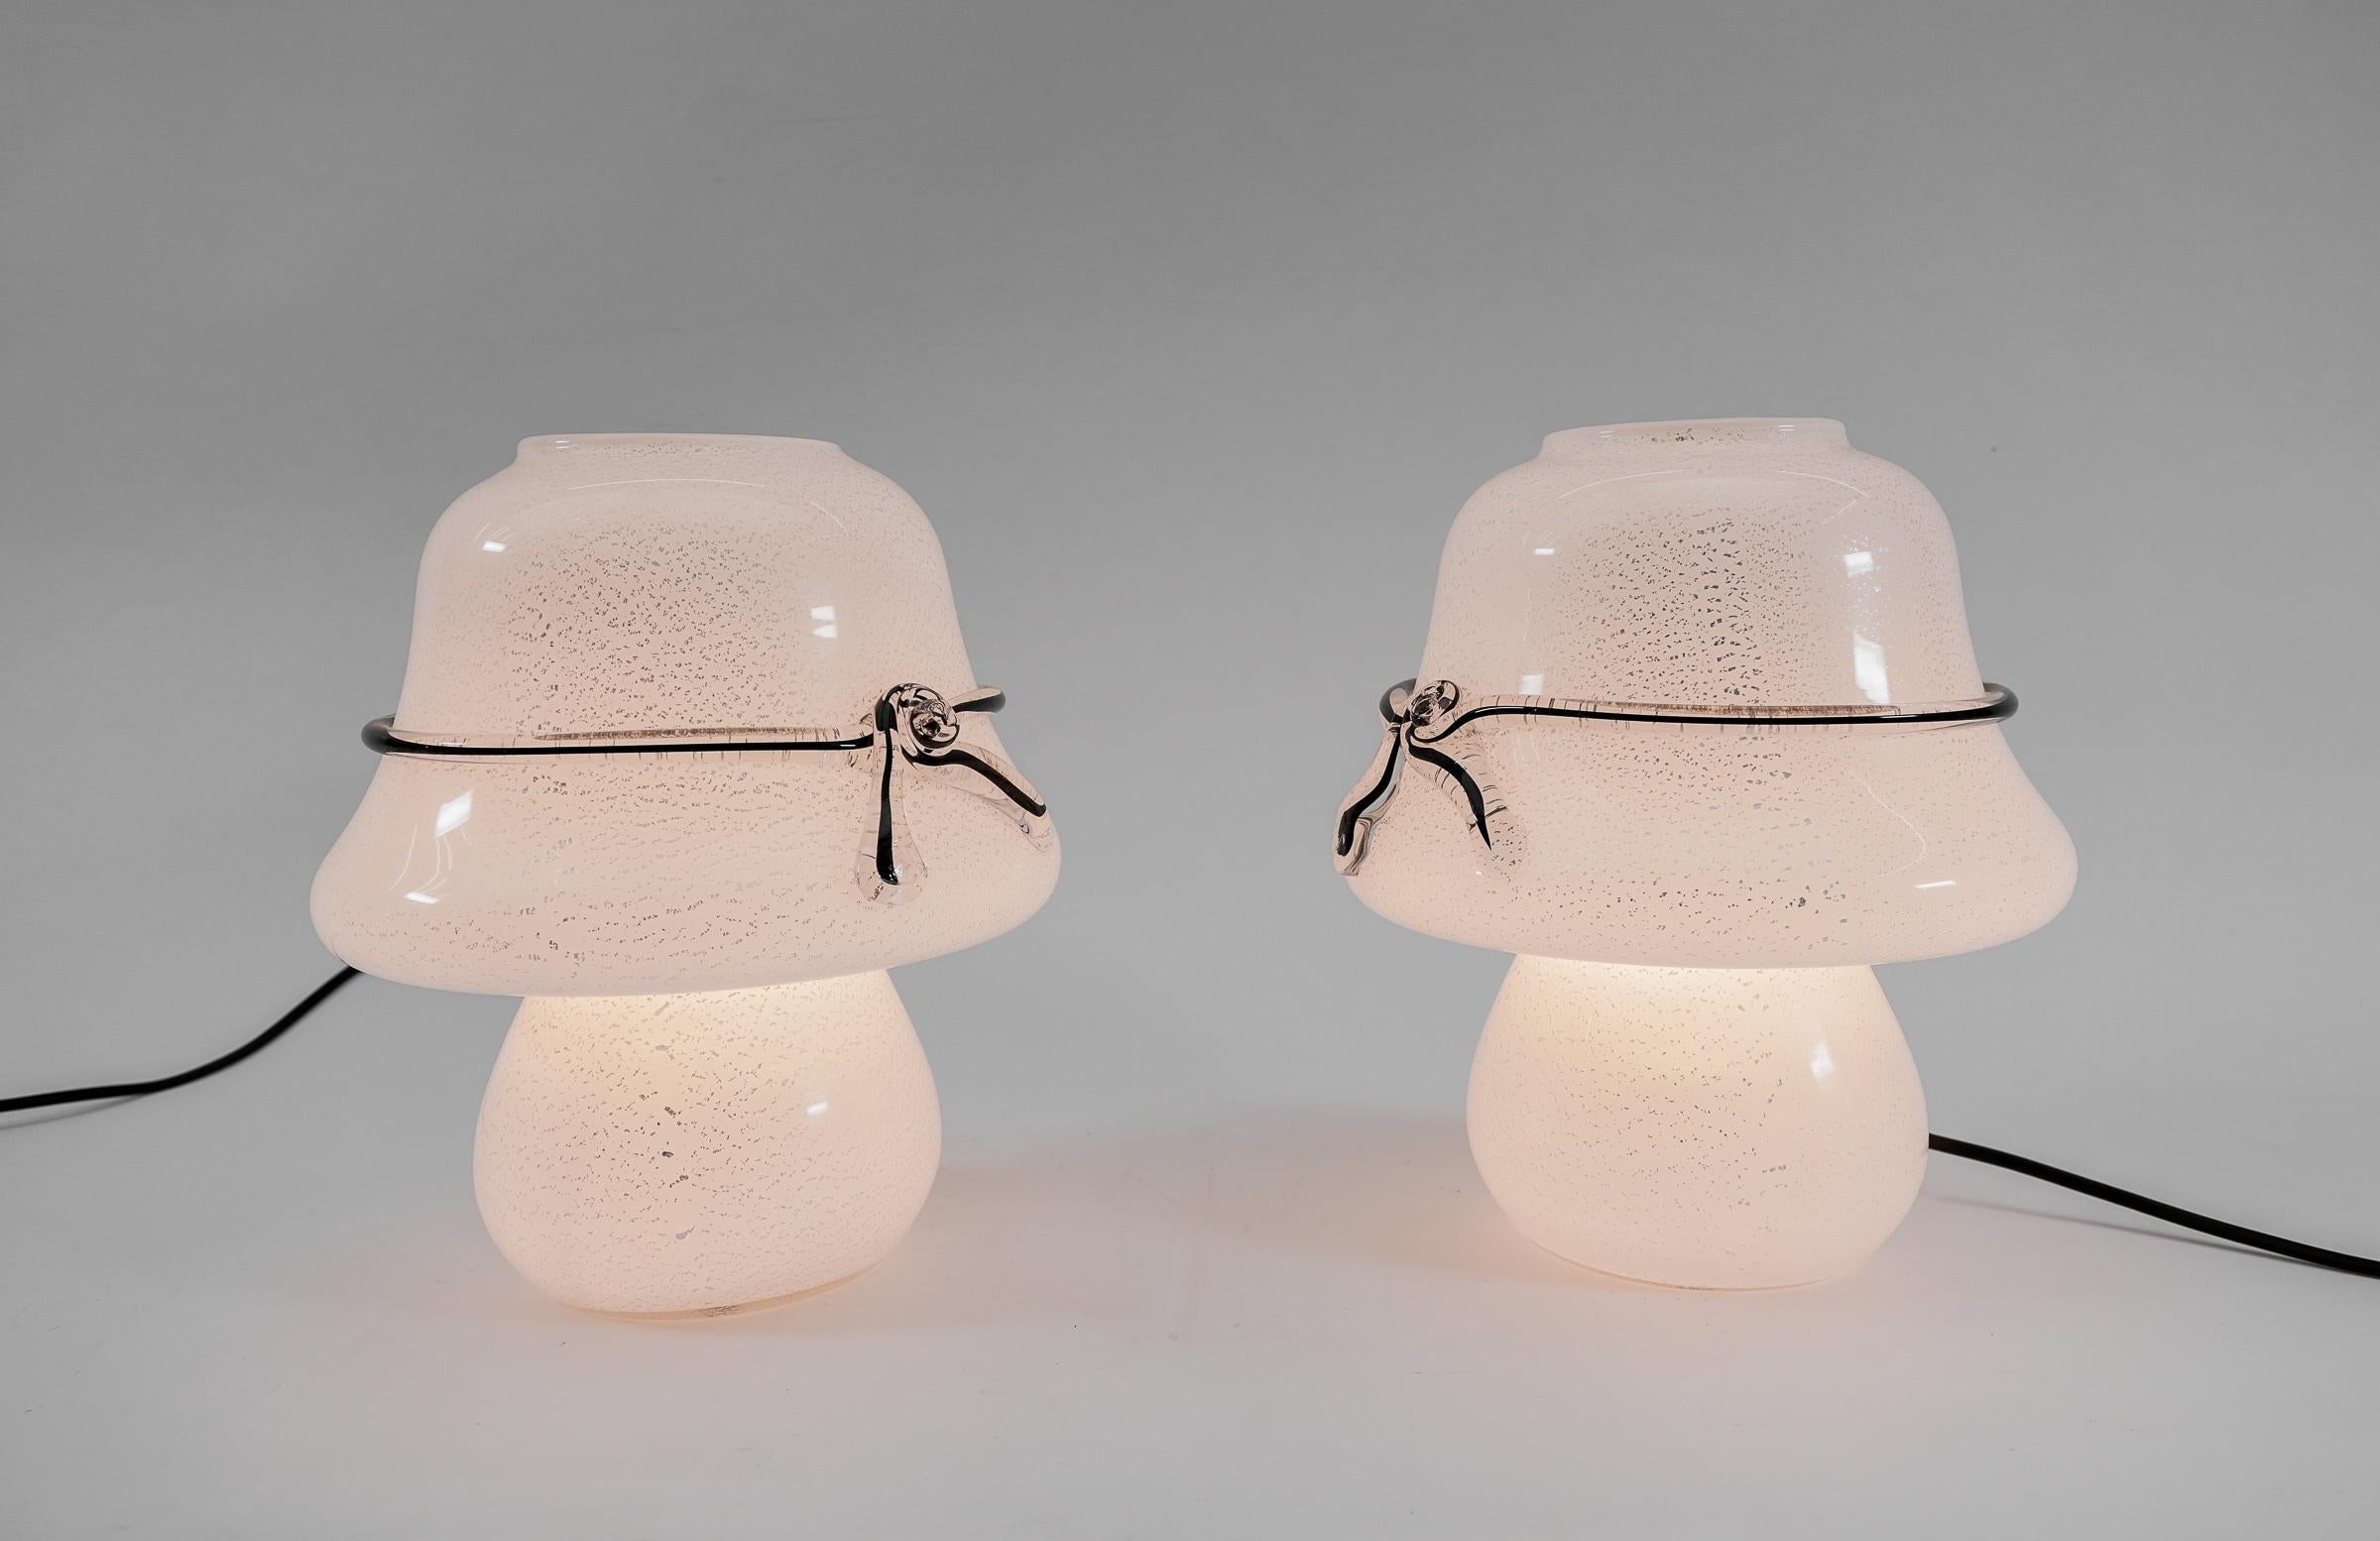 Pair of Murano Mushroom Table Lamps with Enclosed Silver Platelets, 1960s In Excellent Condition For Sale In Nürnberg, Bayern